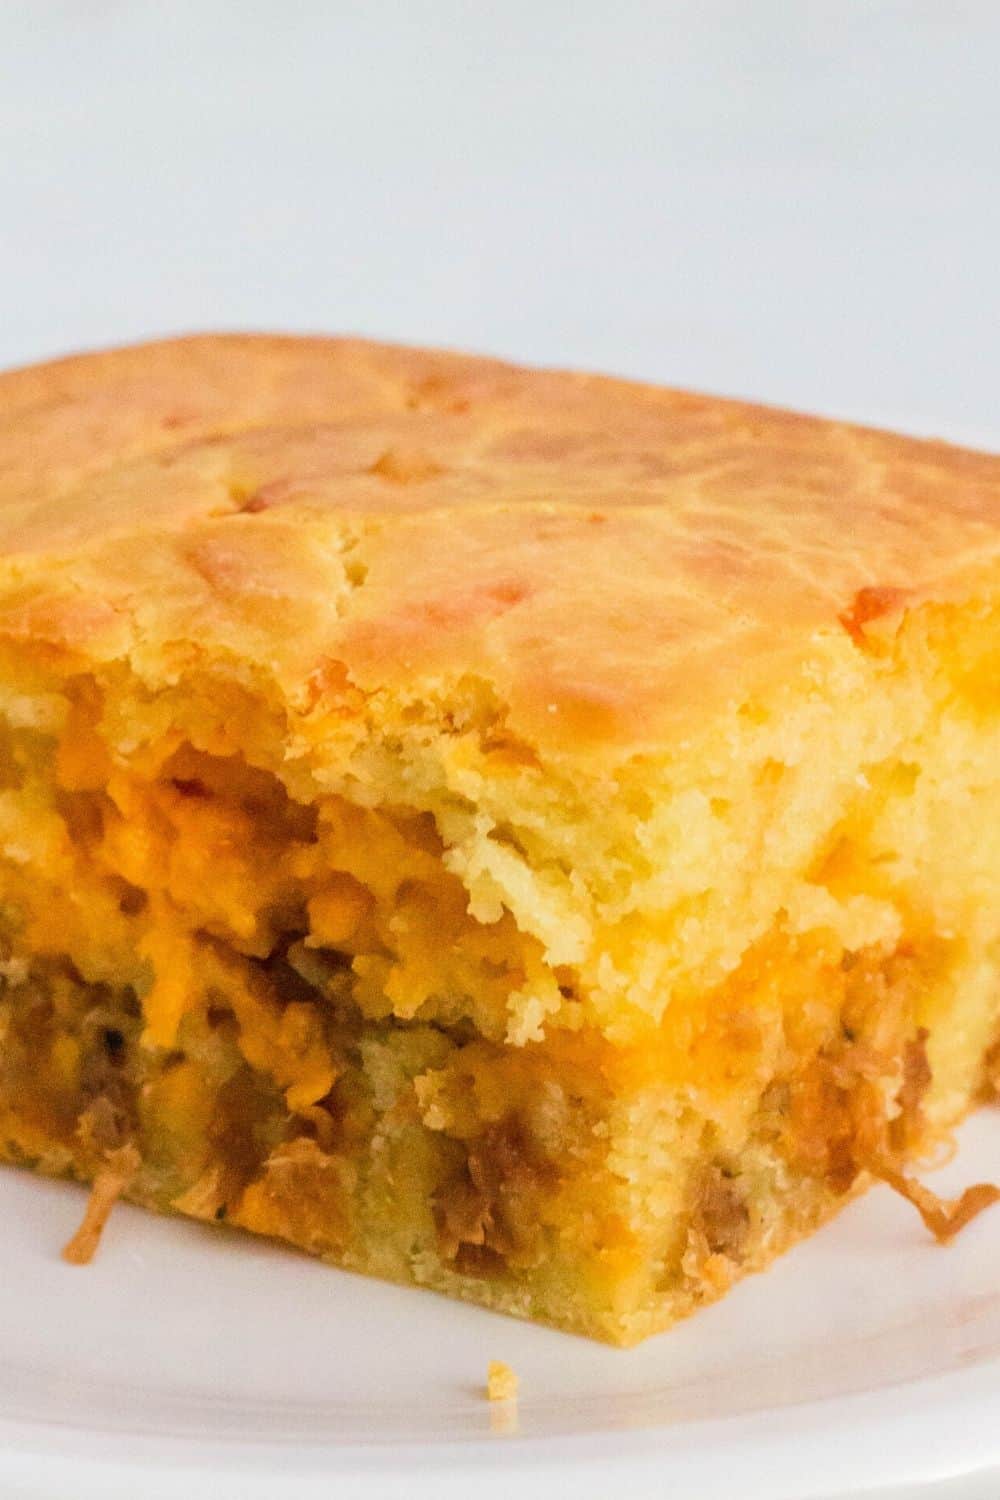 close-up view of a slice of bola de carne, a portuguese bread stuffed with meat and cheese